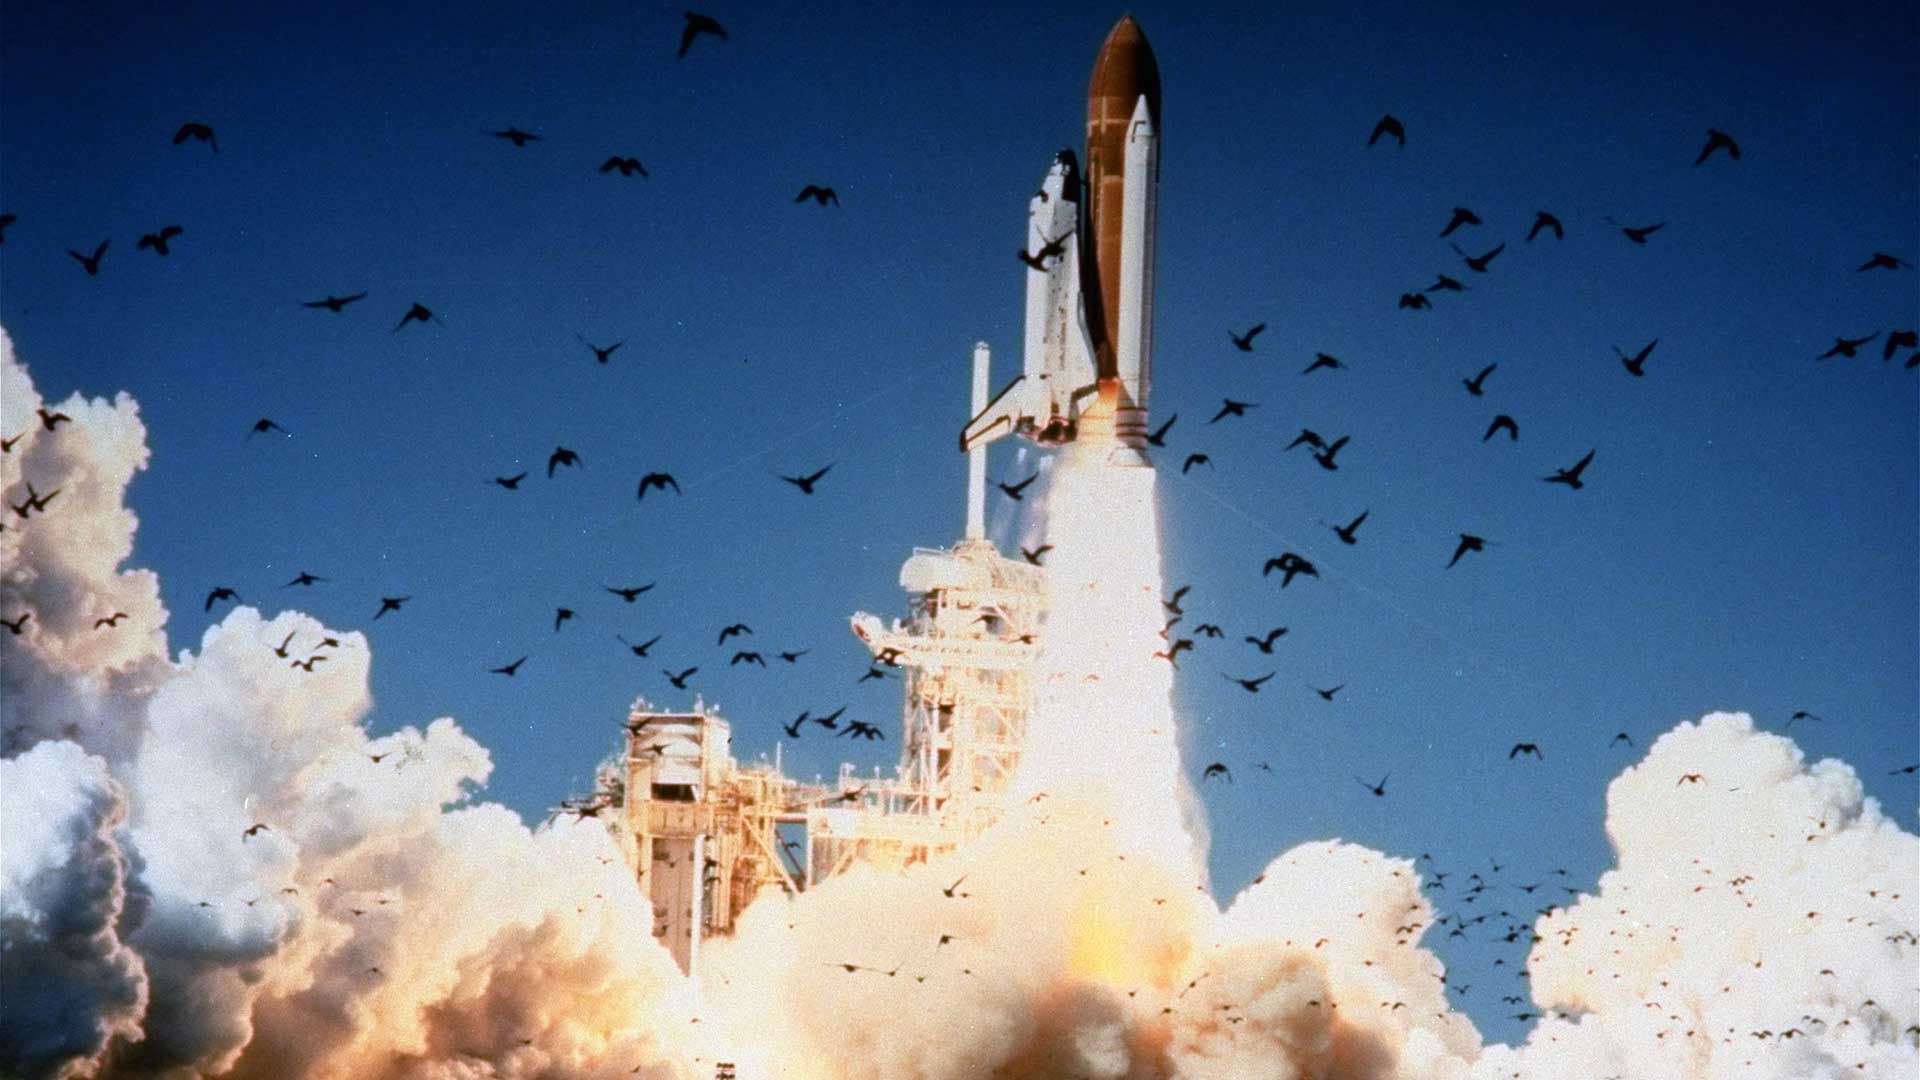 What Did We Learn From the Challenger Tragedy?